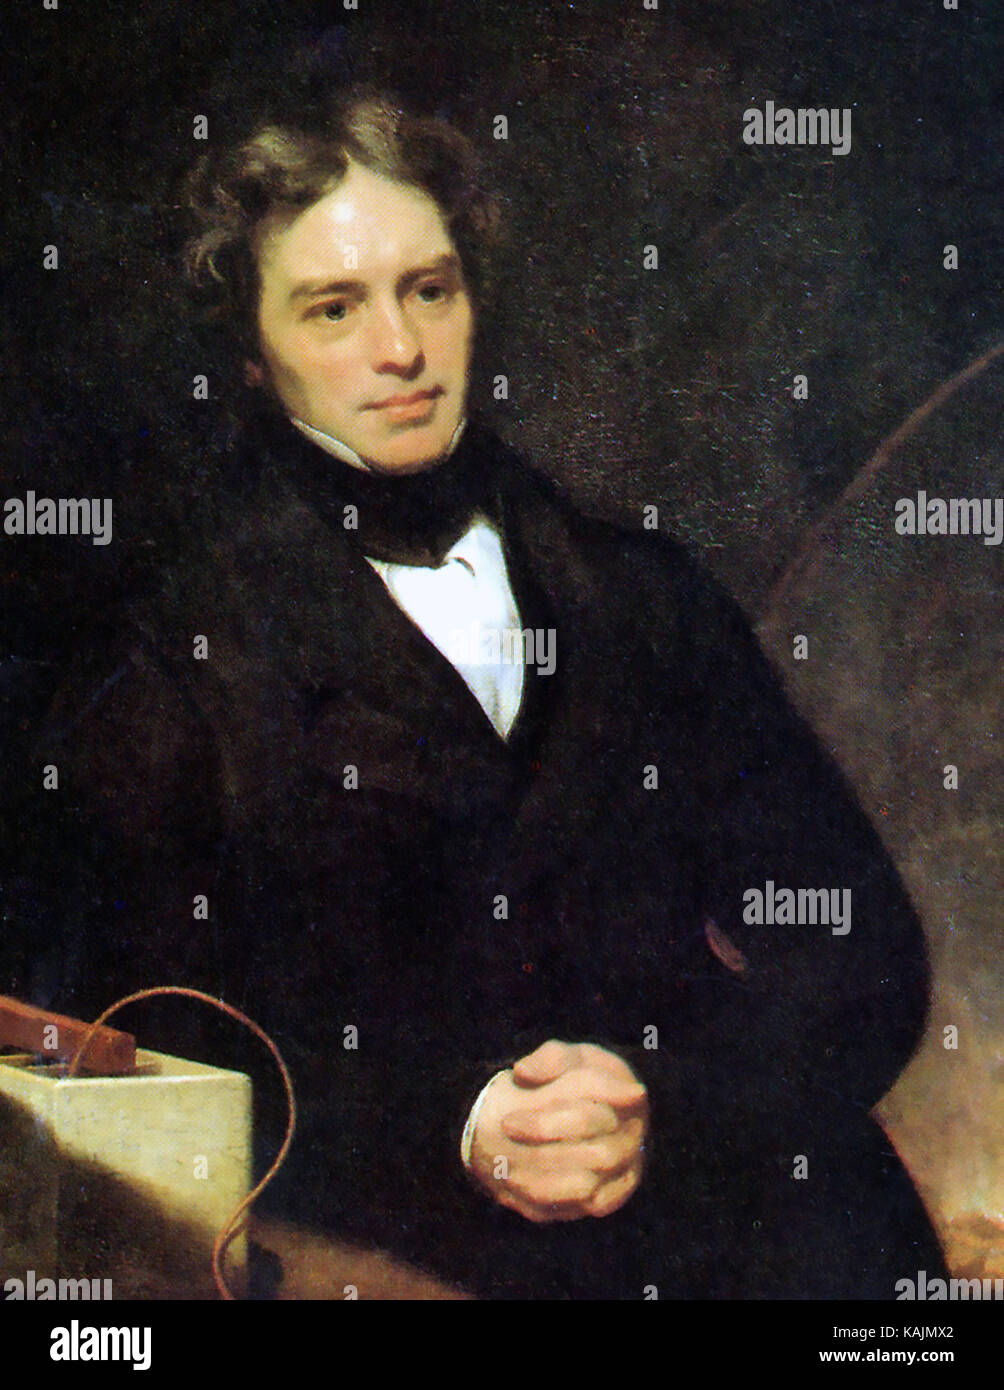 MICHAEL FARADAY (1791-1867) English scientist painted by Thomas Phillips in 1842 Stock Photo